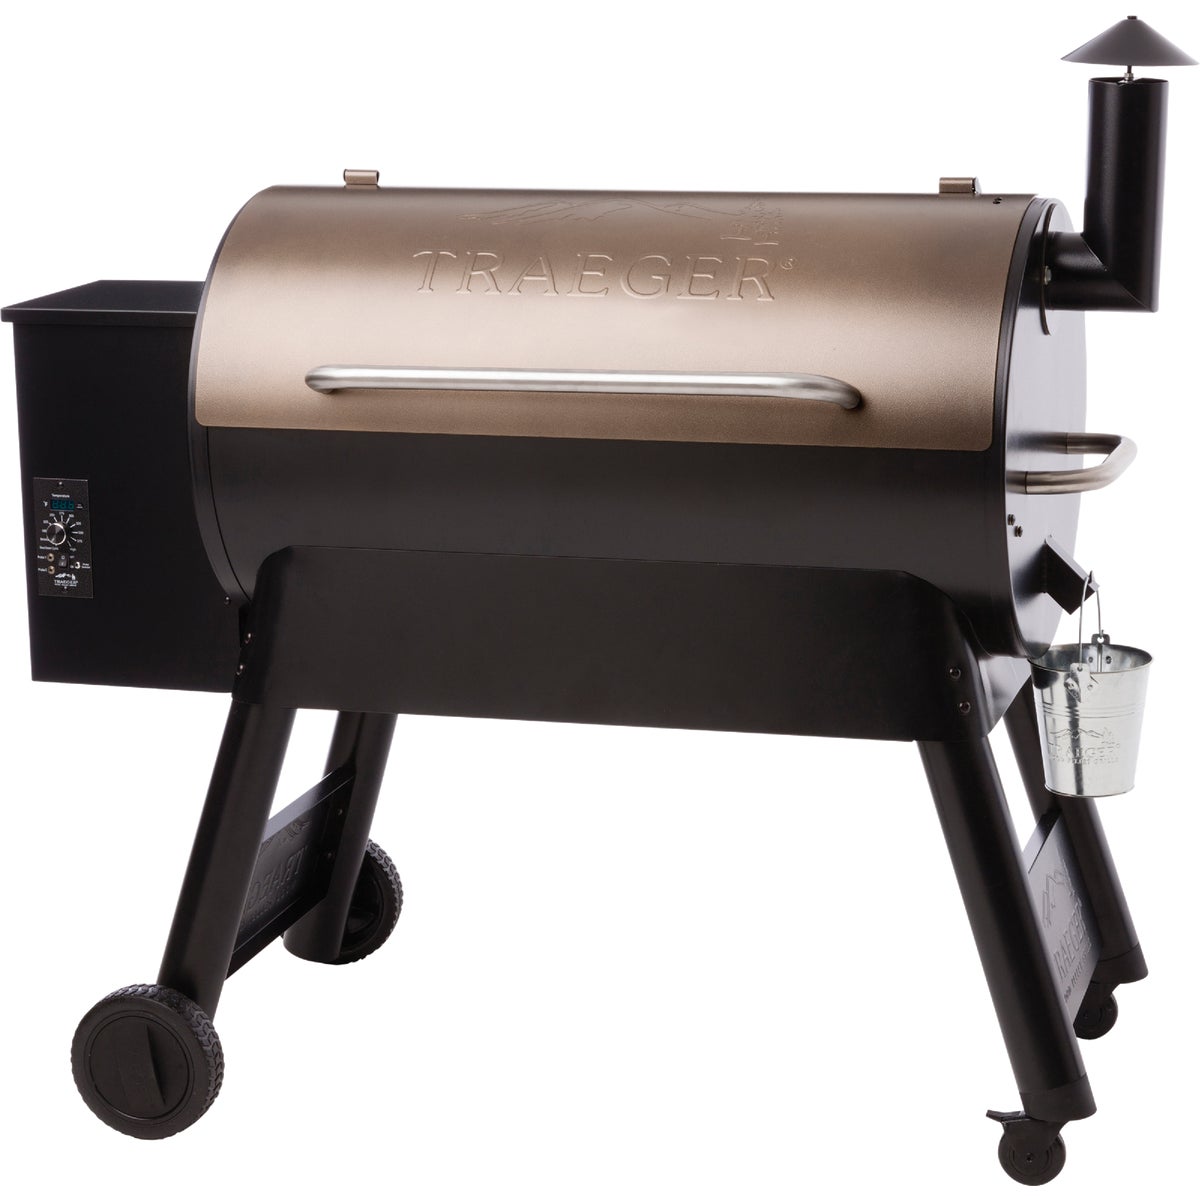 Item 808202, Grill, smoke, bake, braise, roast, or barbecue. Features 884 Sq. In.